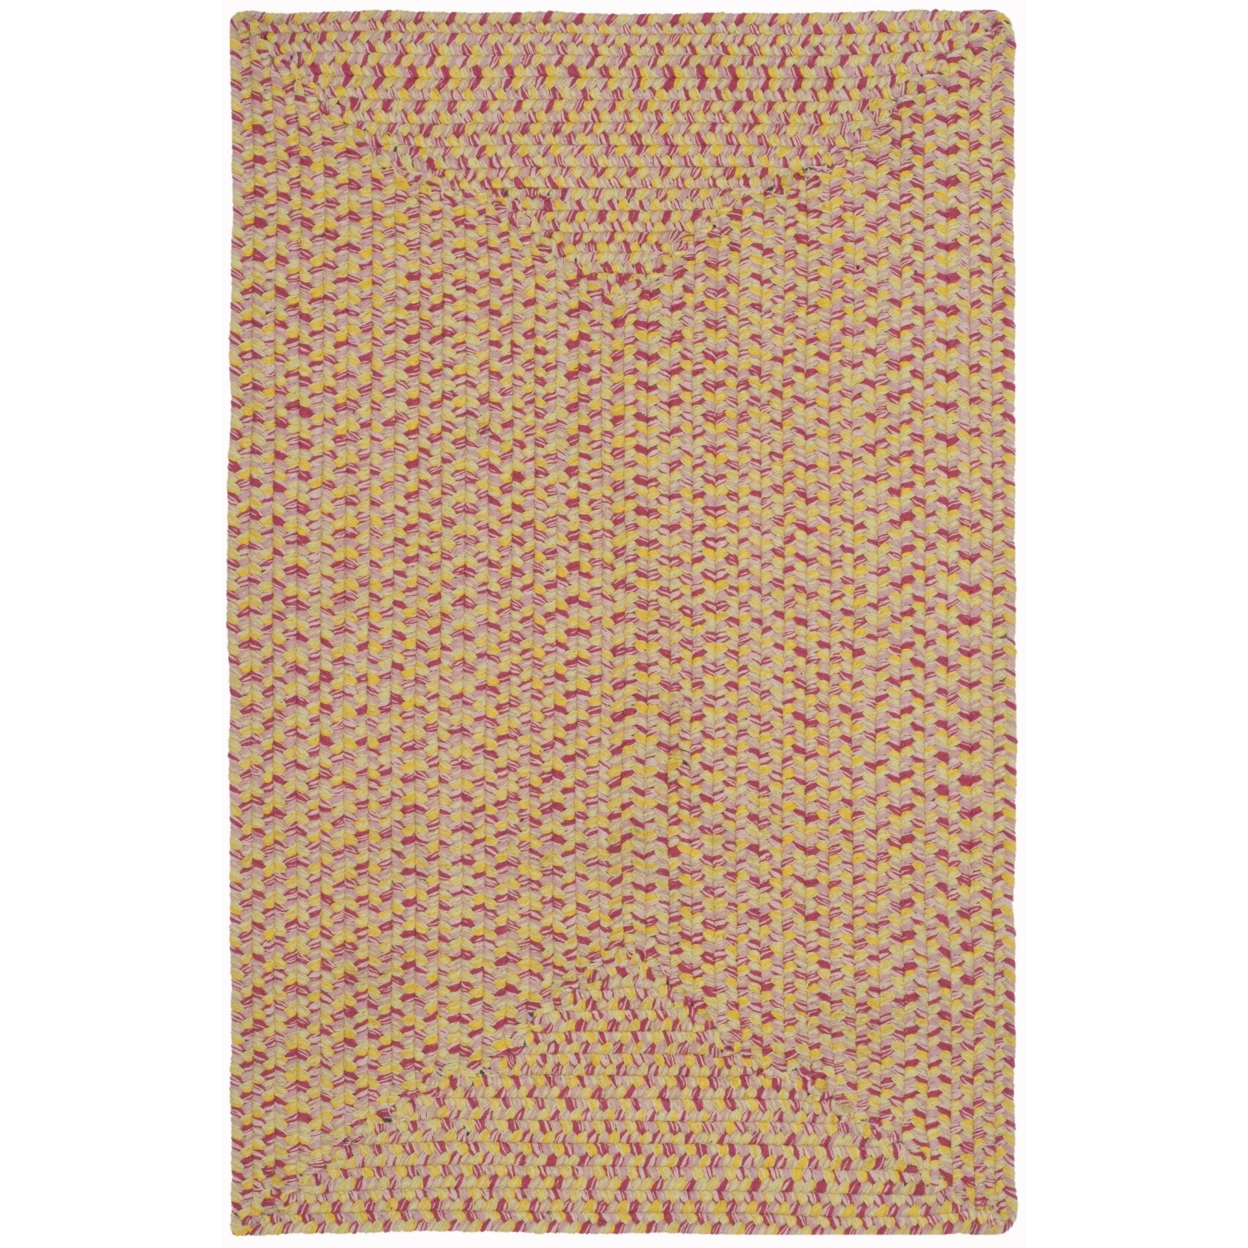 SAFAVIEH Braided Collection BRD164A Handwoven Multi Rug - 3' X 5' Oval